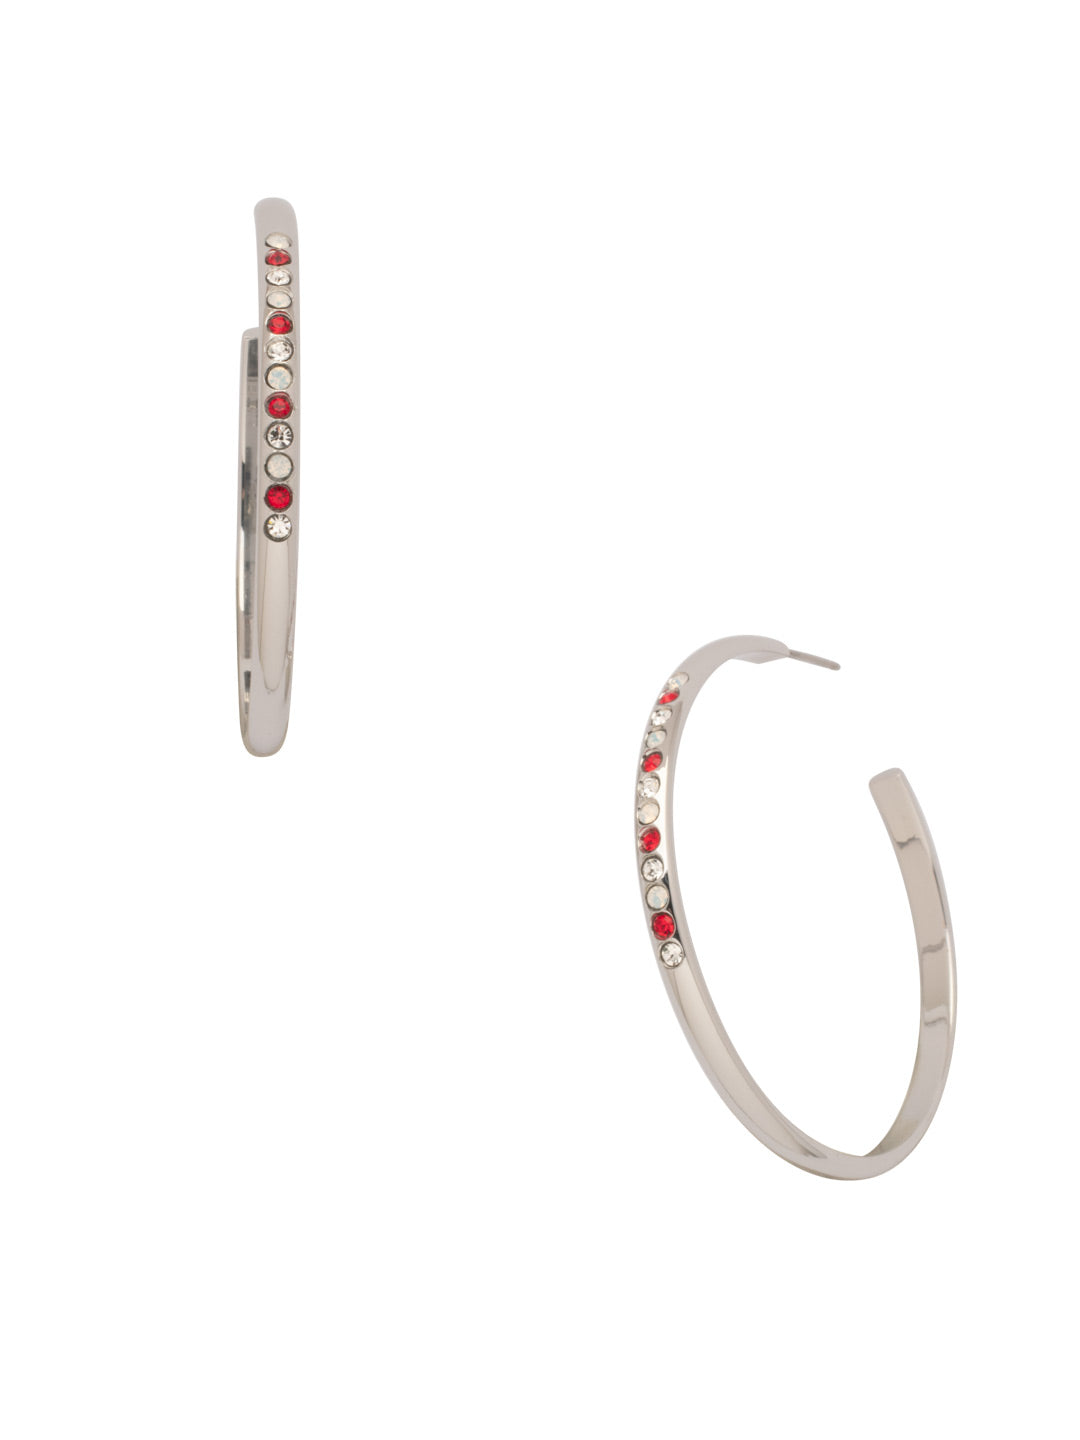 Bugsy Hoop Earrings - EEP56PDCP - <p>Quirky and fun, that's the Bugsy Hoop Earring. Veering from the traditional metal hoop, this pair features a fun row of sparking crystals spot-on center. From Sorrelli's Crimson Pride collection in our Palladium finish.</p>